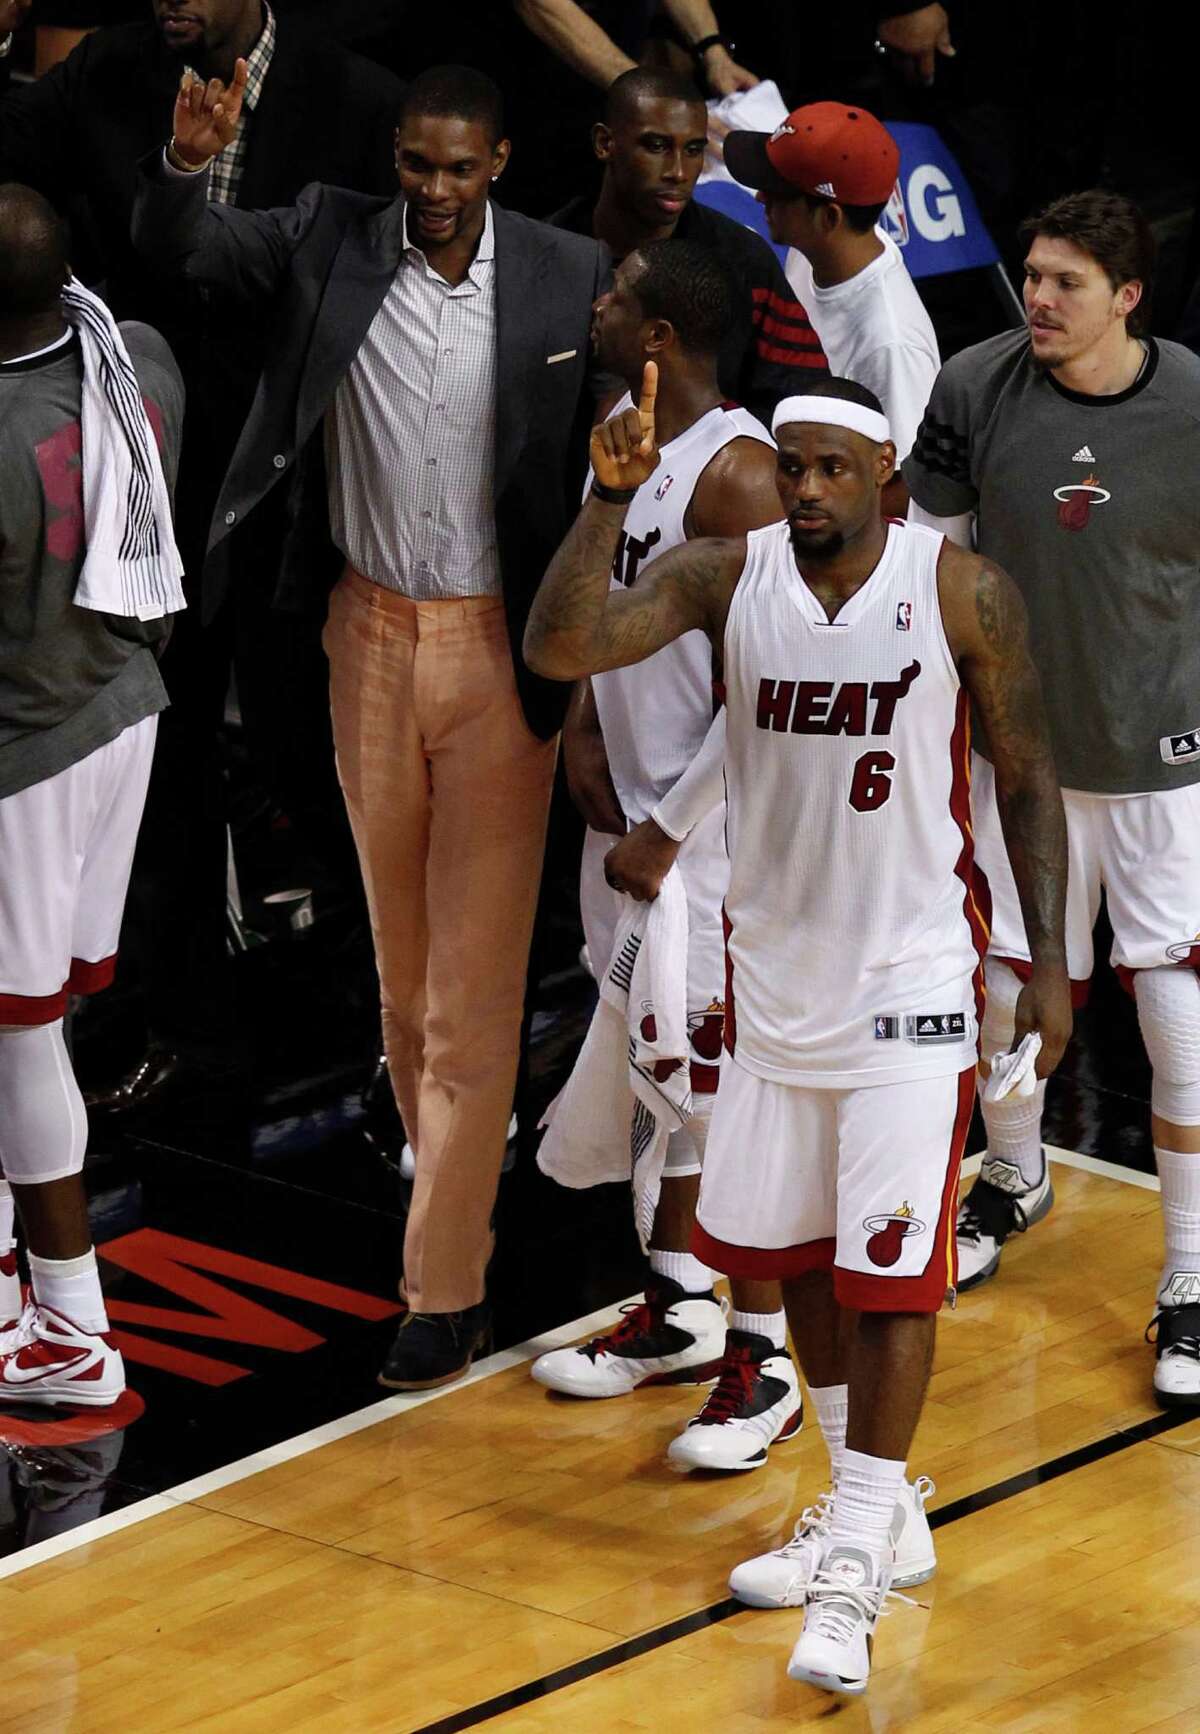 Miami Heat's Chris Bosh, left, Dwyane Wade, center, and LeBron James (6) walk off the court after defeated the Boston Celtics 93-79 during the second half of Game 1 in their NBA basketball Eastern Conference Finals playoff series, Monday, May 28, 2012, in Miami. (AP Photo/Wilfredo Lee)